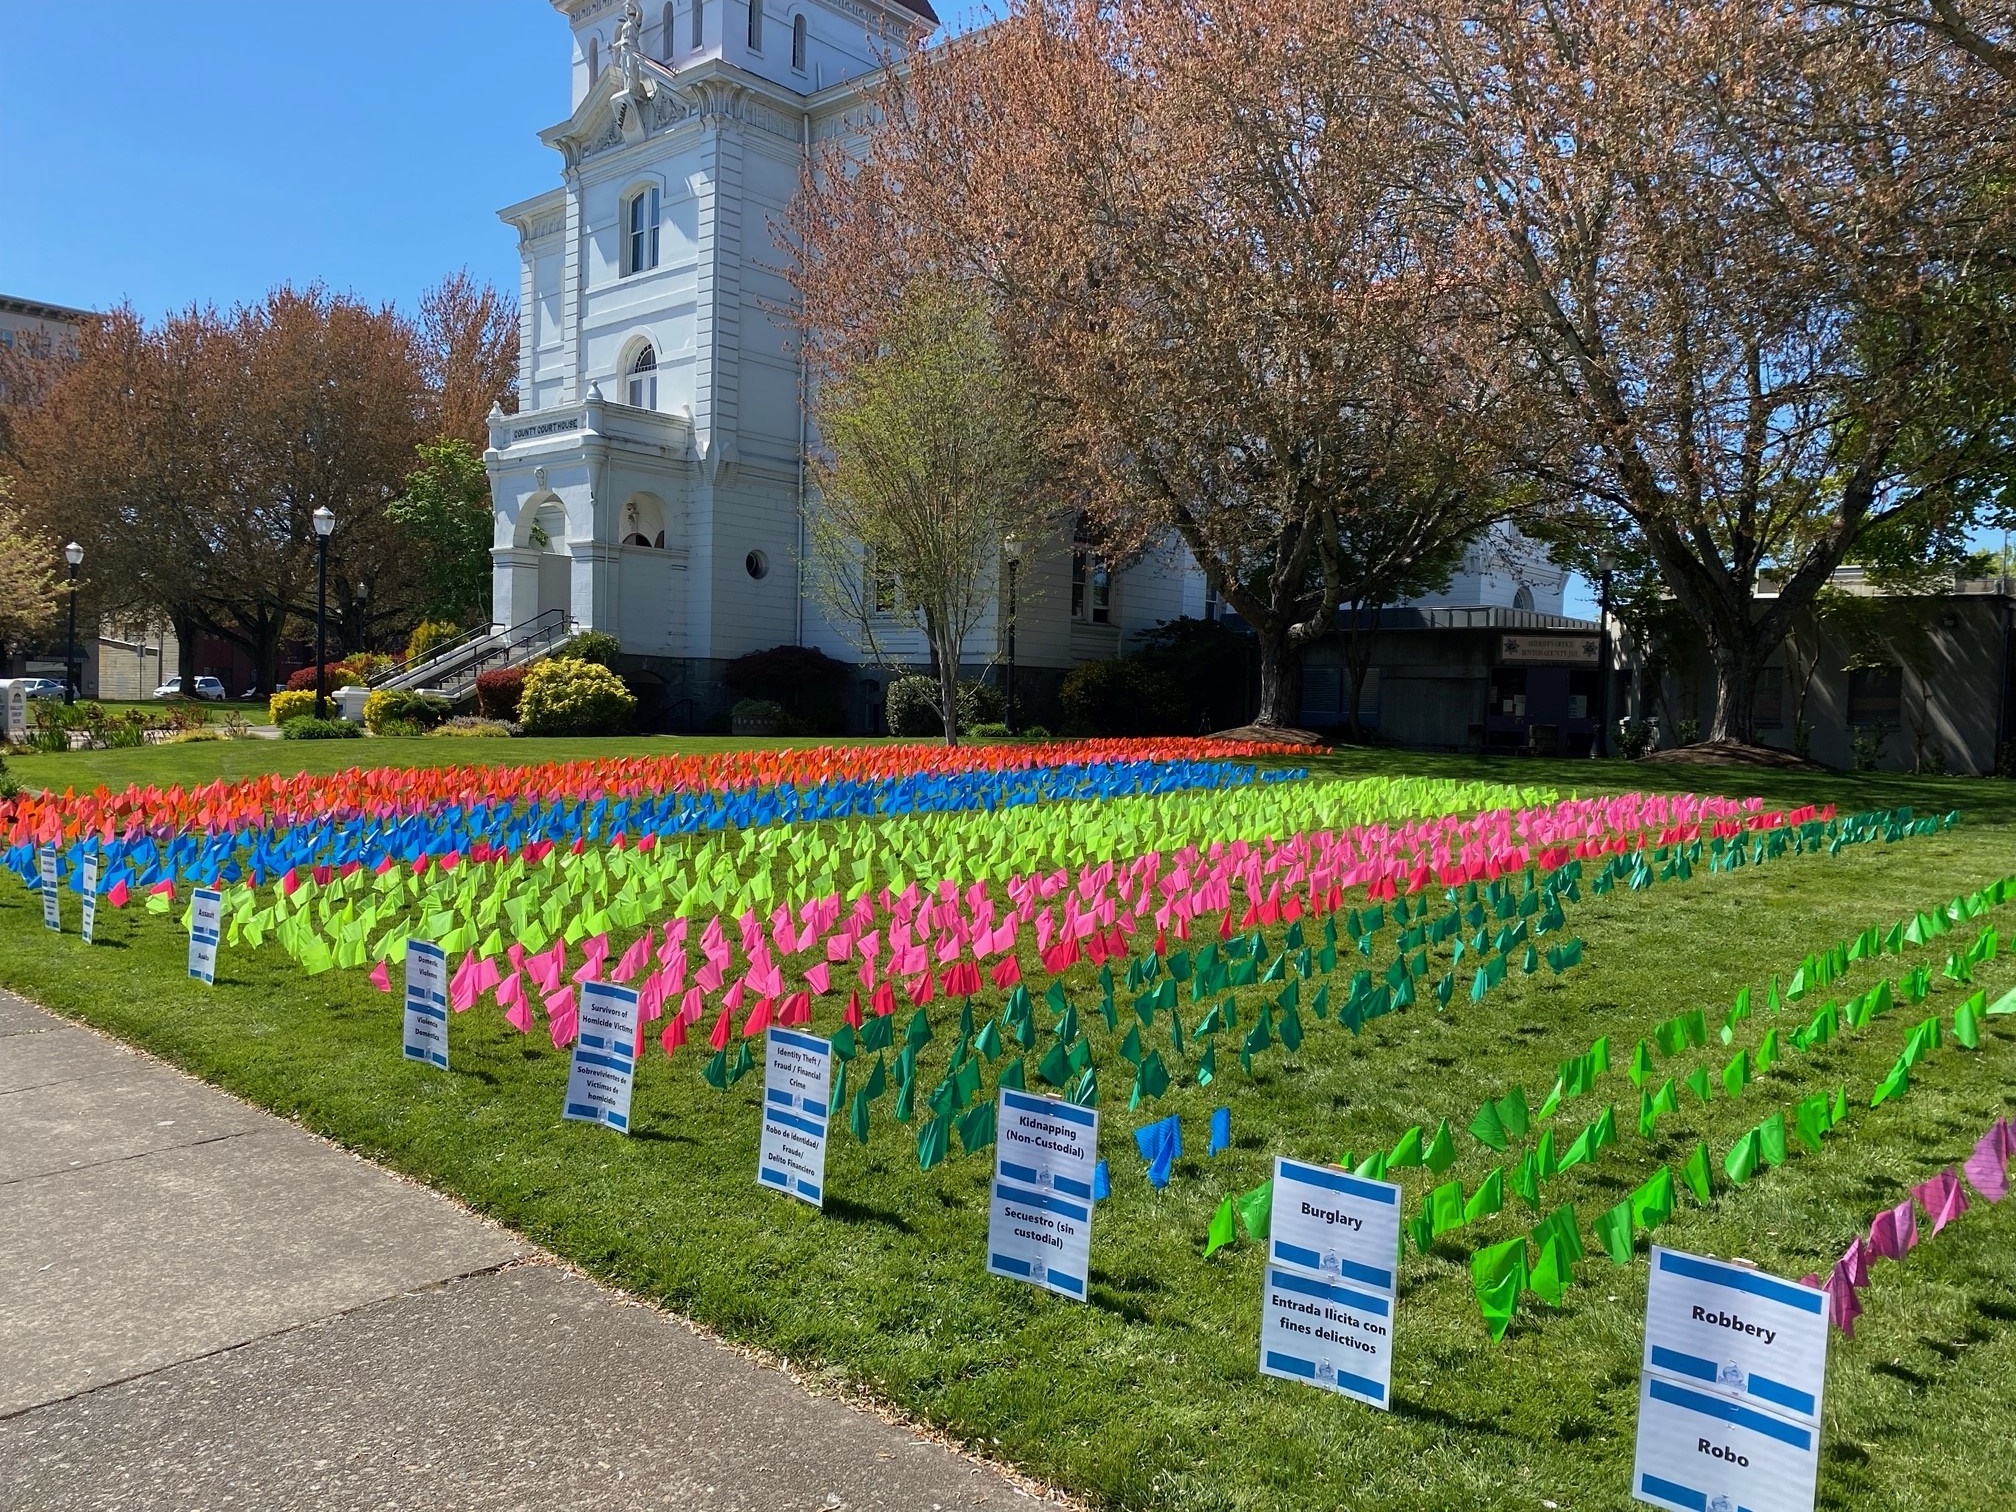 Thousands of ribbons of pink, blue, lime green, yellow, and dark green adorn the courthouse lawn in year in front of the white Benton County Courthouse, in honor of crime victims' rights.